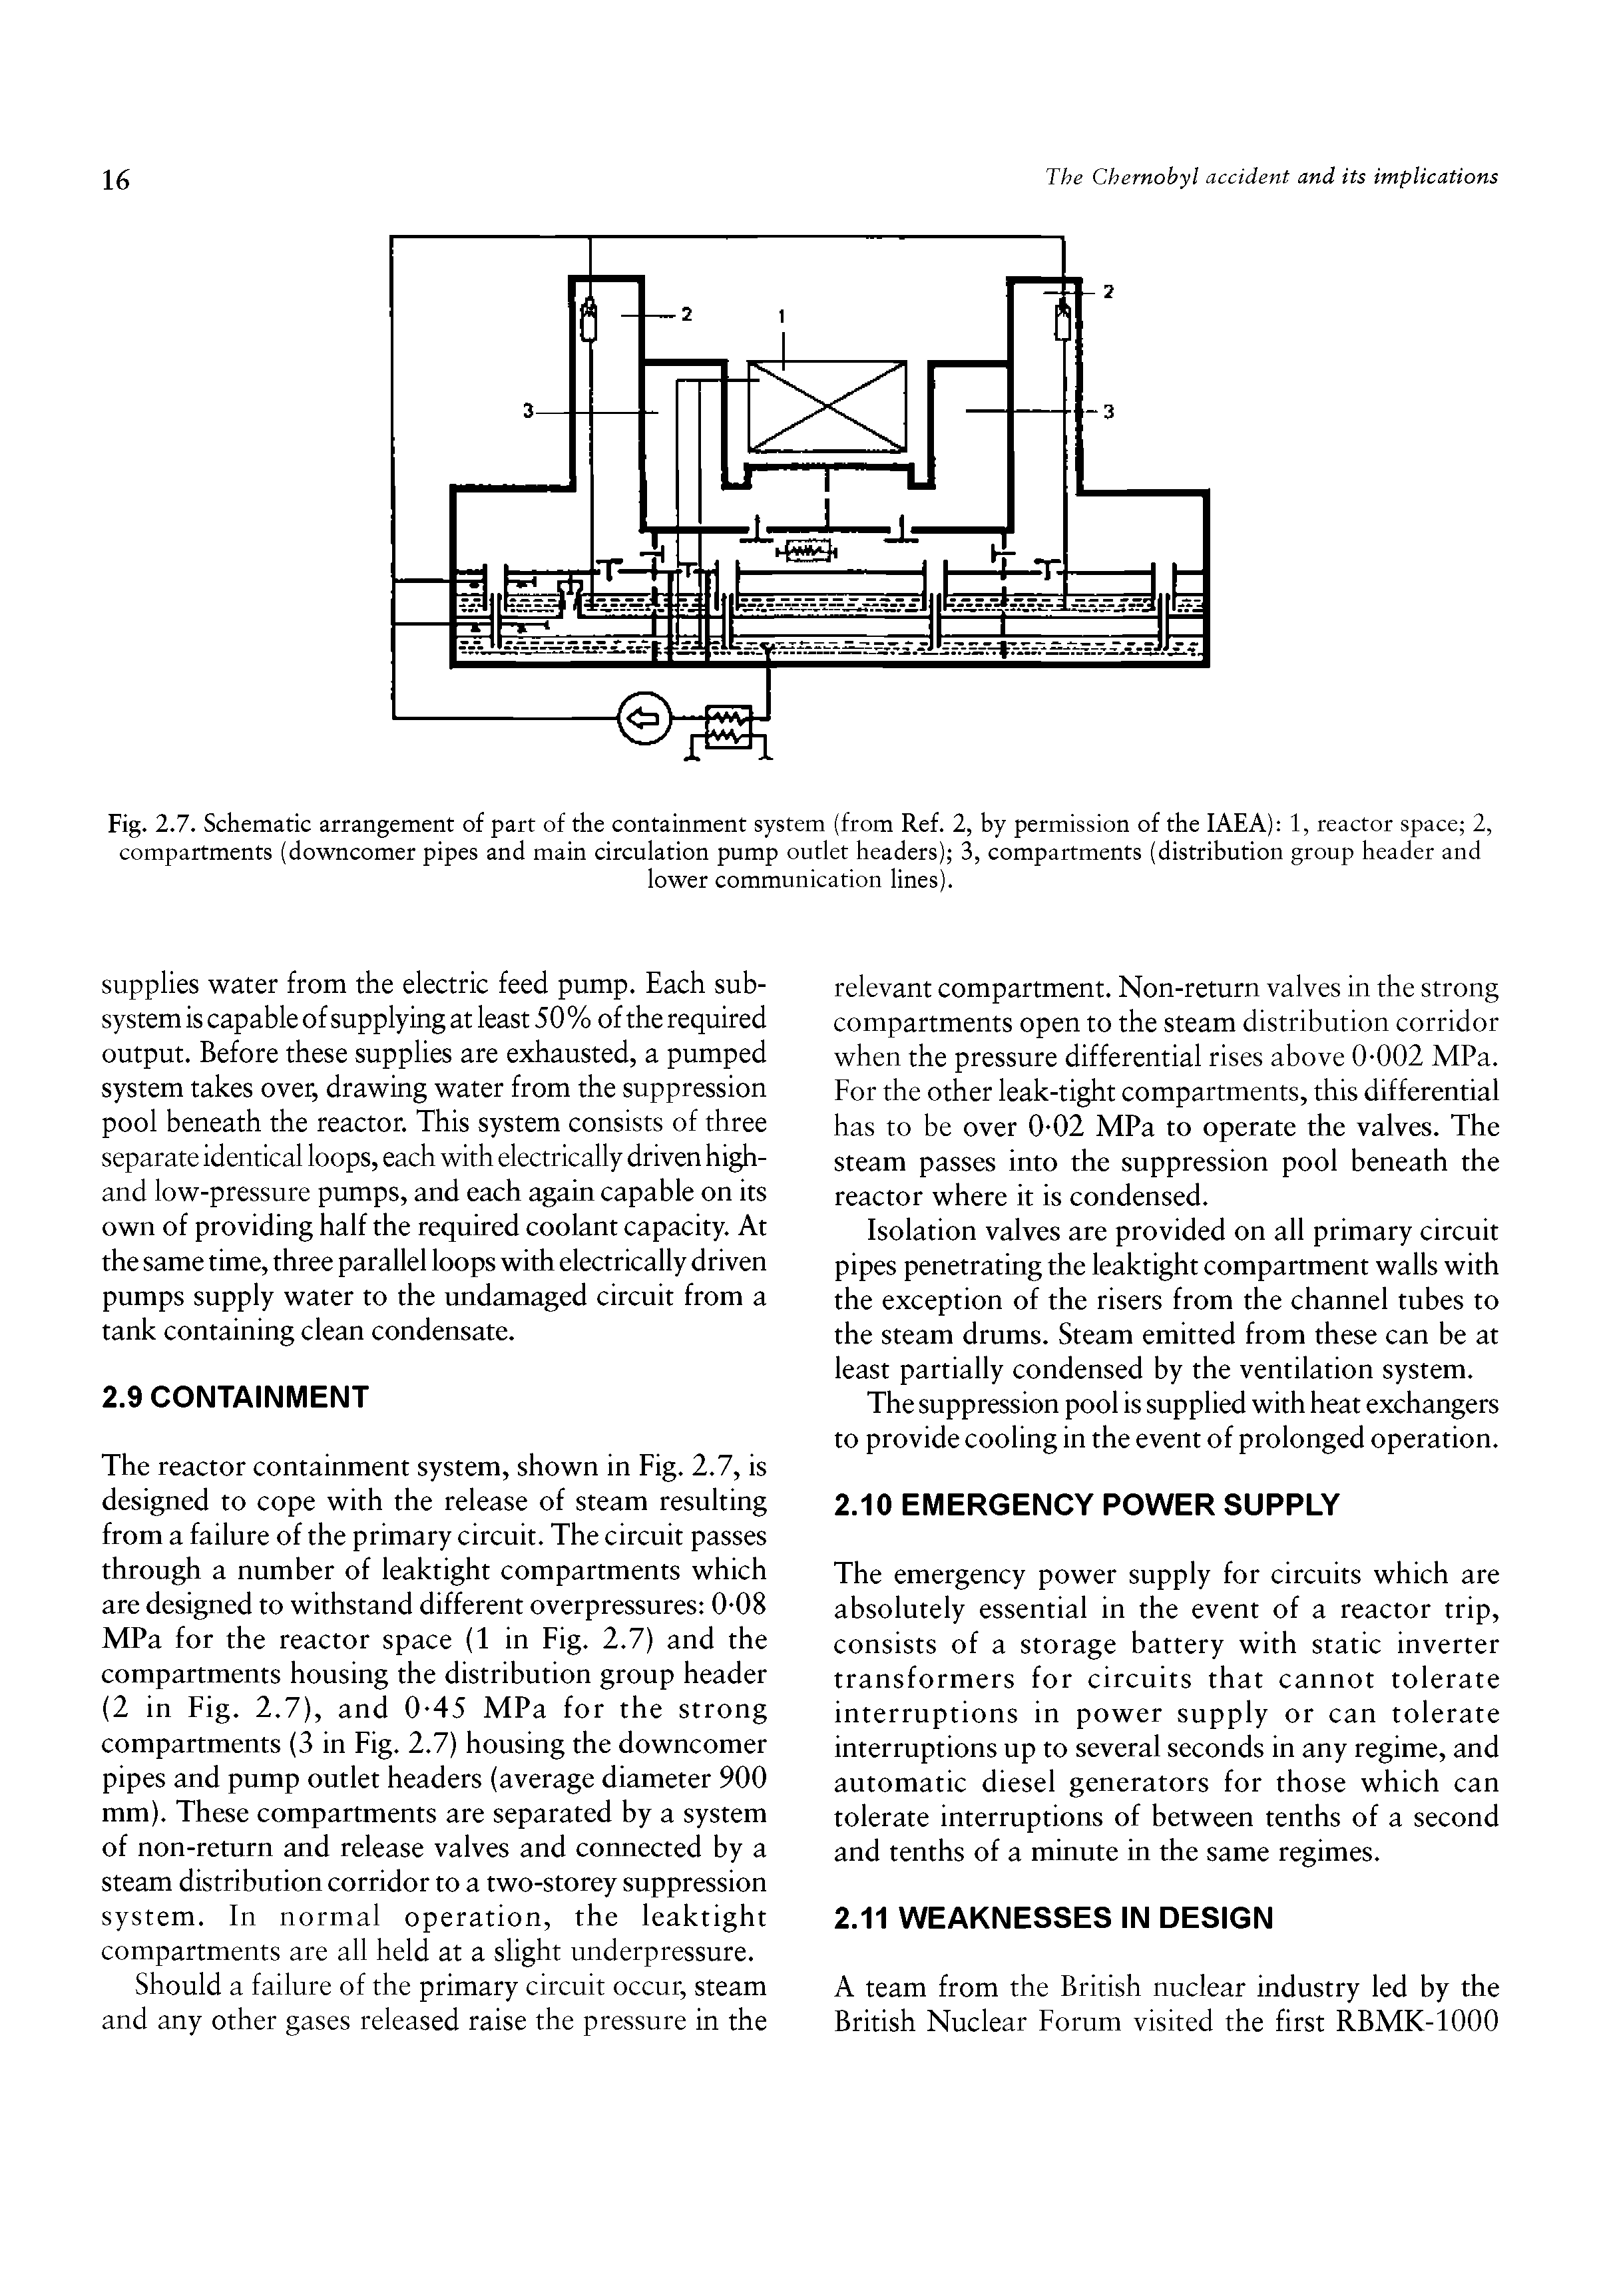 Fig. 2.7. Schematic arrangement of part of the containment system (from Ref. 2, by permission of the IAEA) 1, reactor space 2, compartments (downcomer pipes and main circulation pump outlet headers) 3, compartments (distribution group header and...